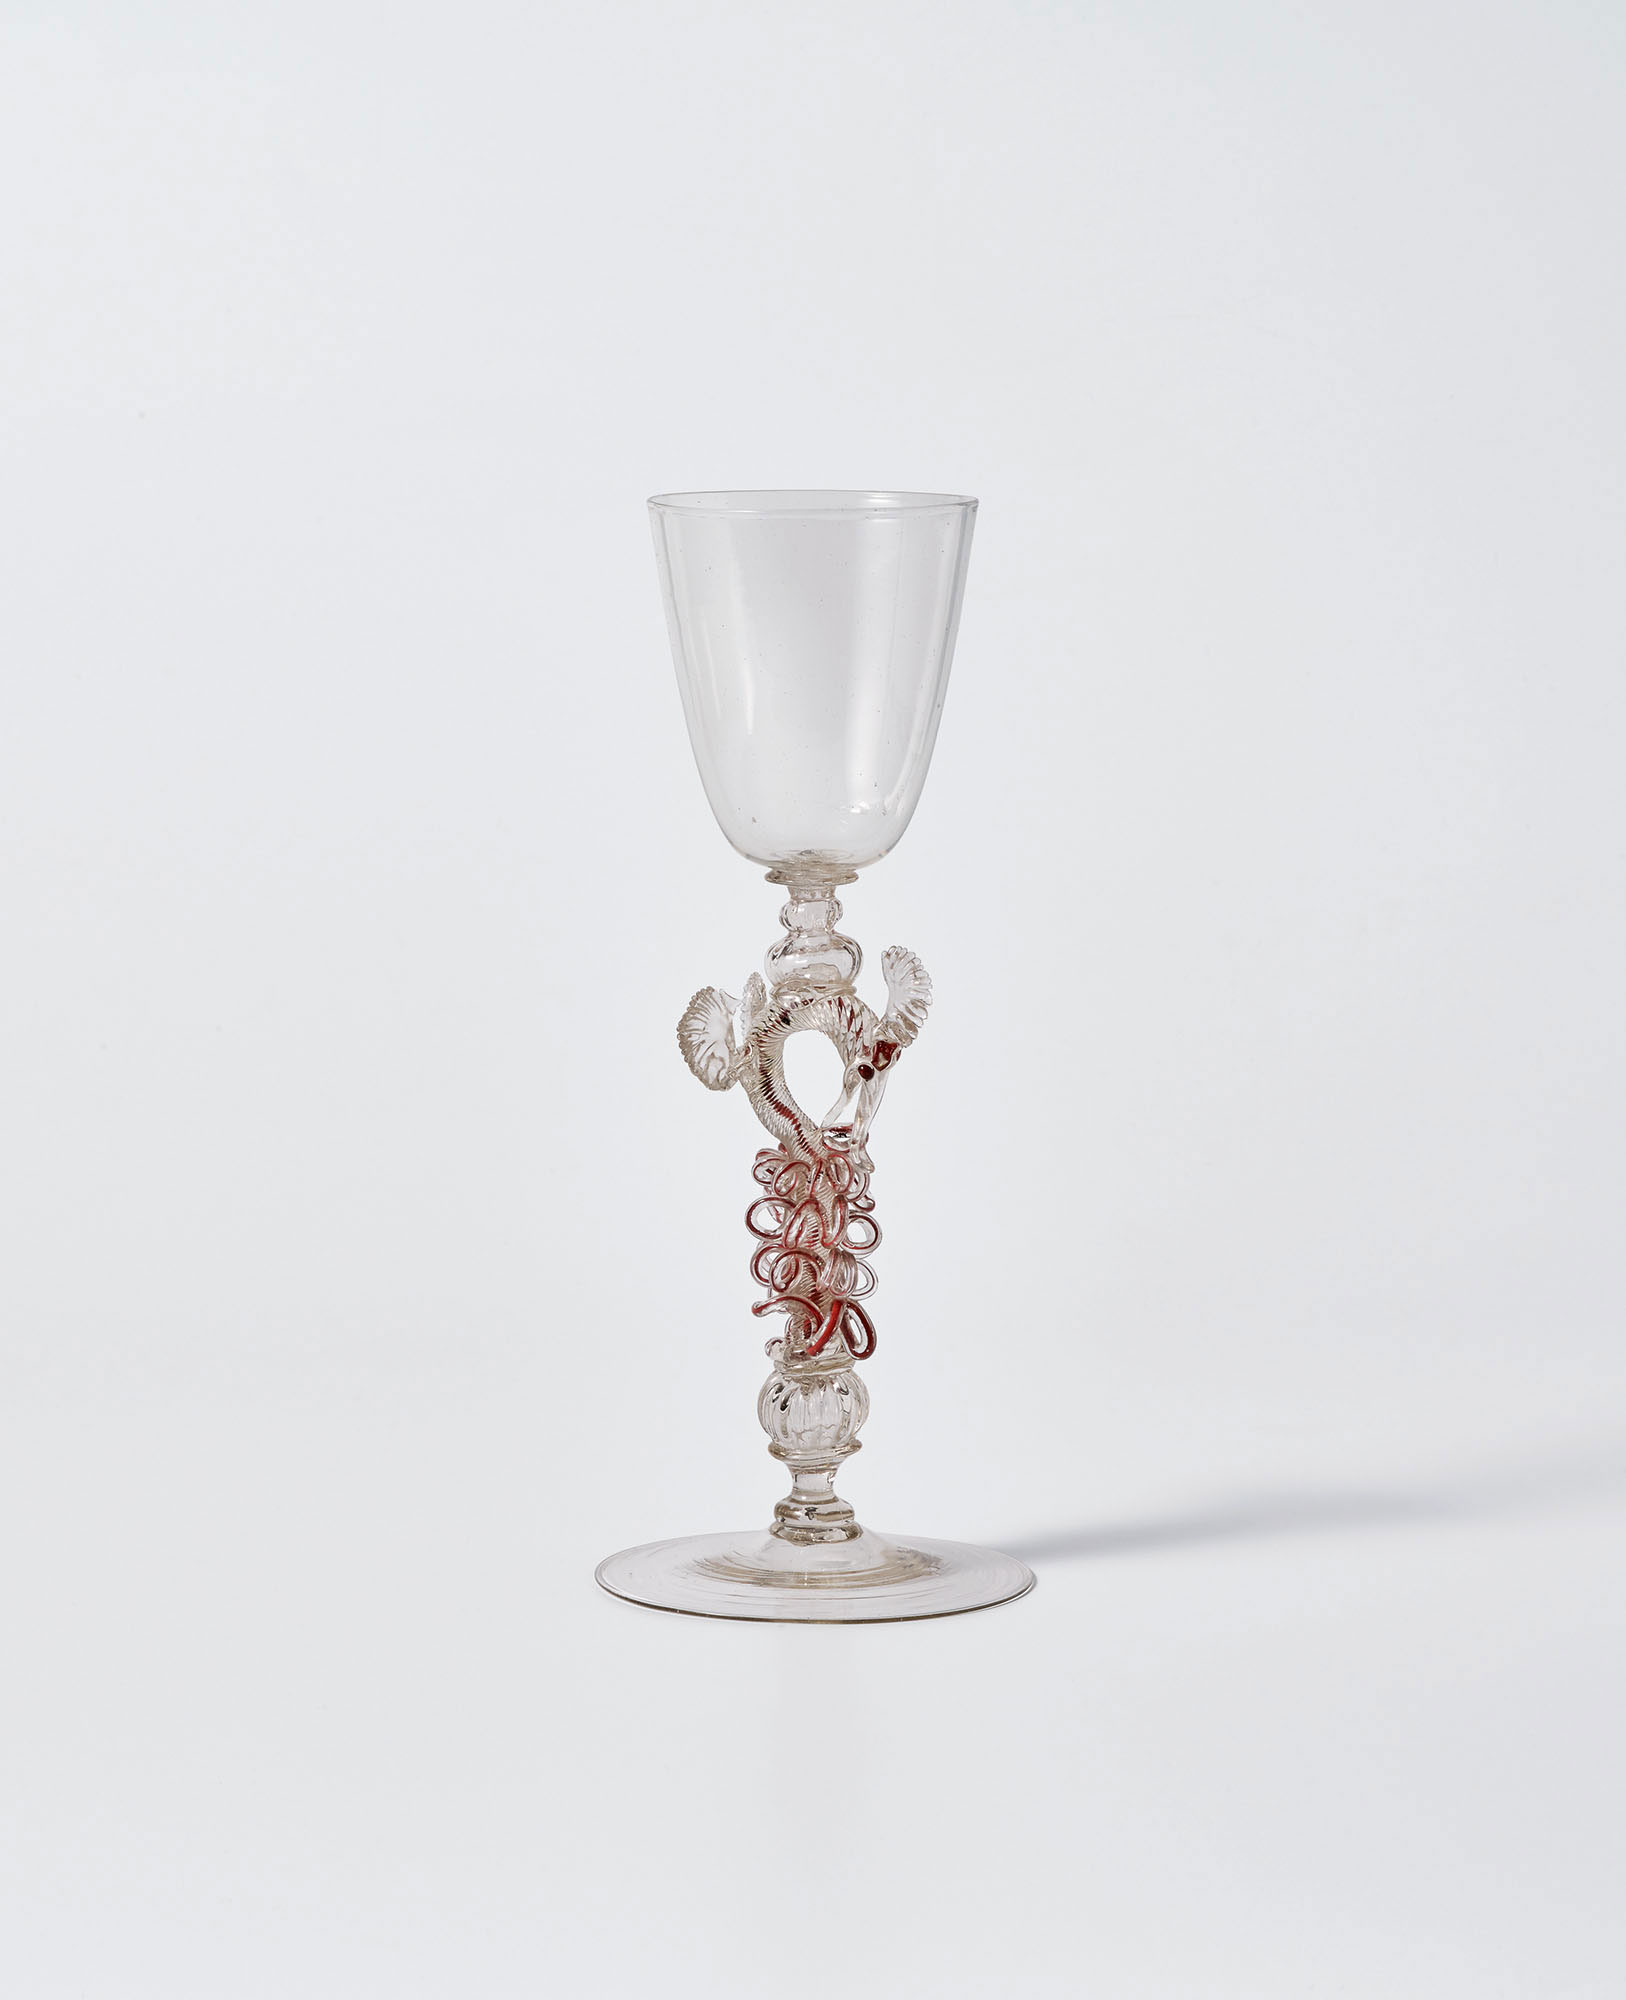 Colorless glass goblet with decorative stem featuring red cane twisted to resemble a crouching dragon